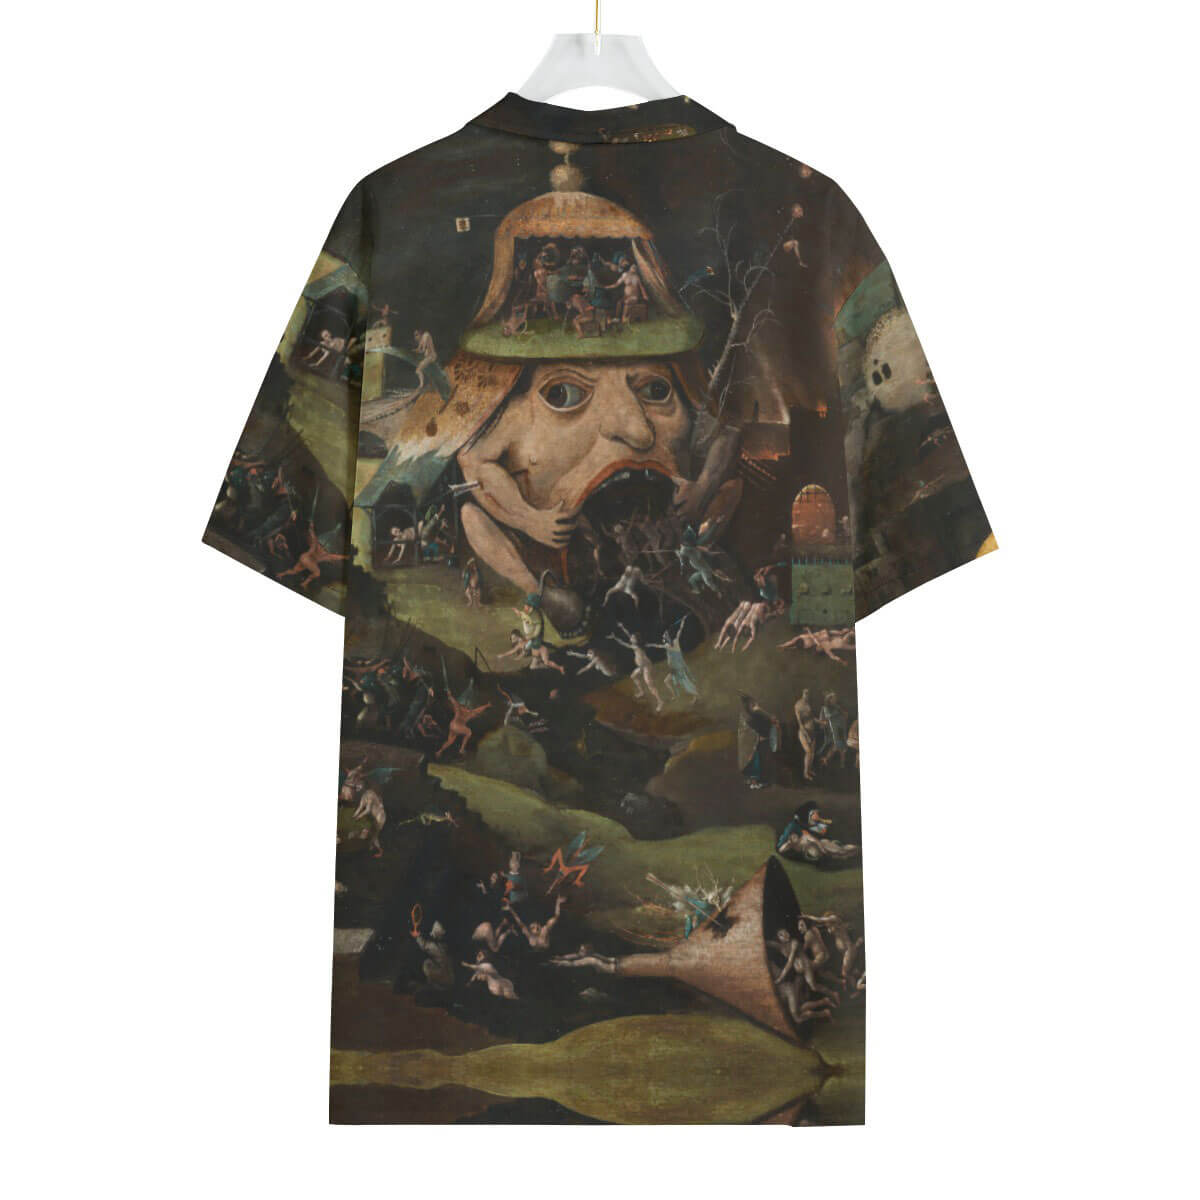 Bosch's Christ in Limbo shirt paired with casual wear